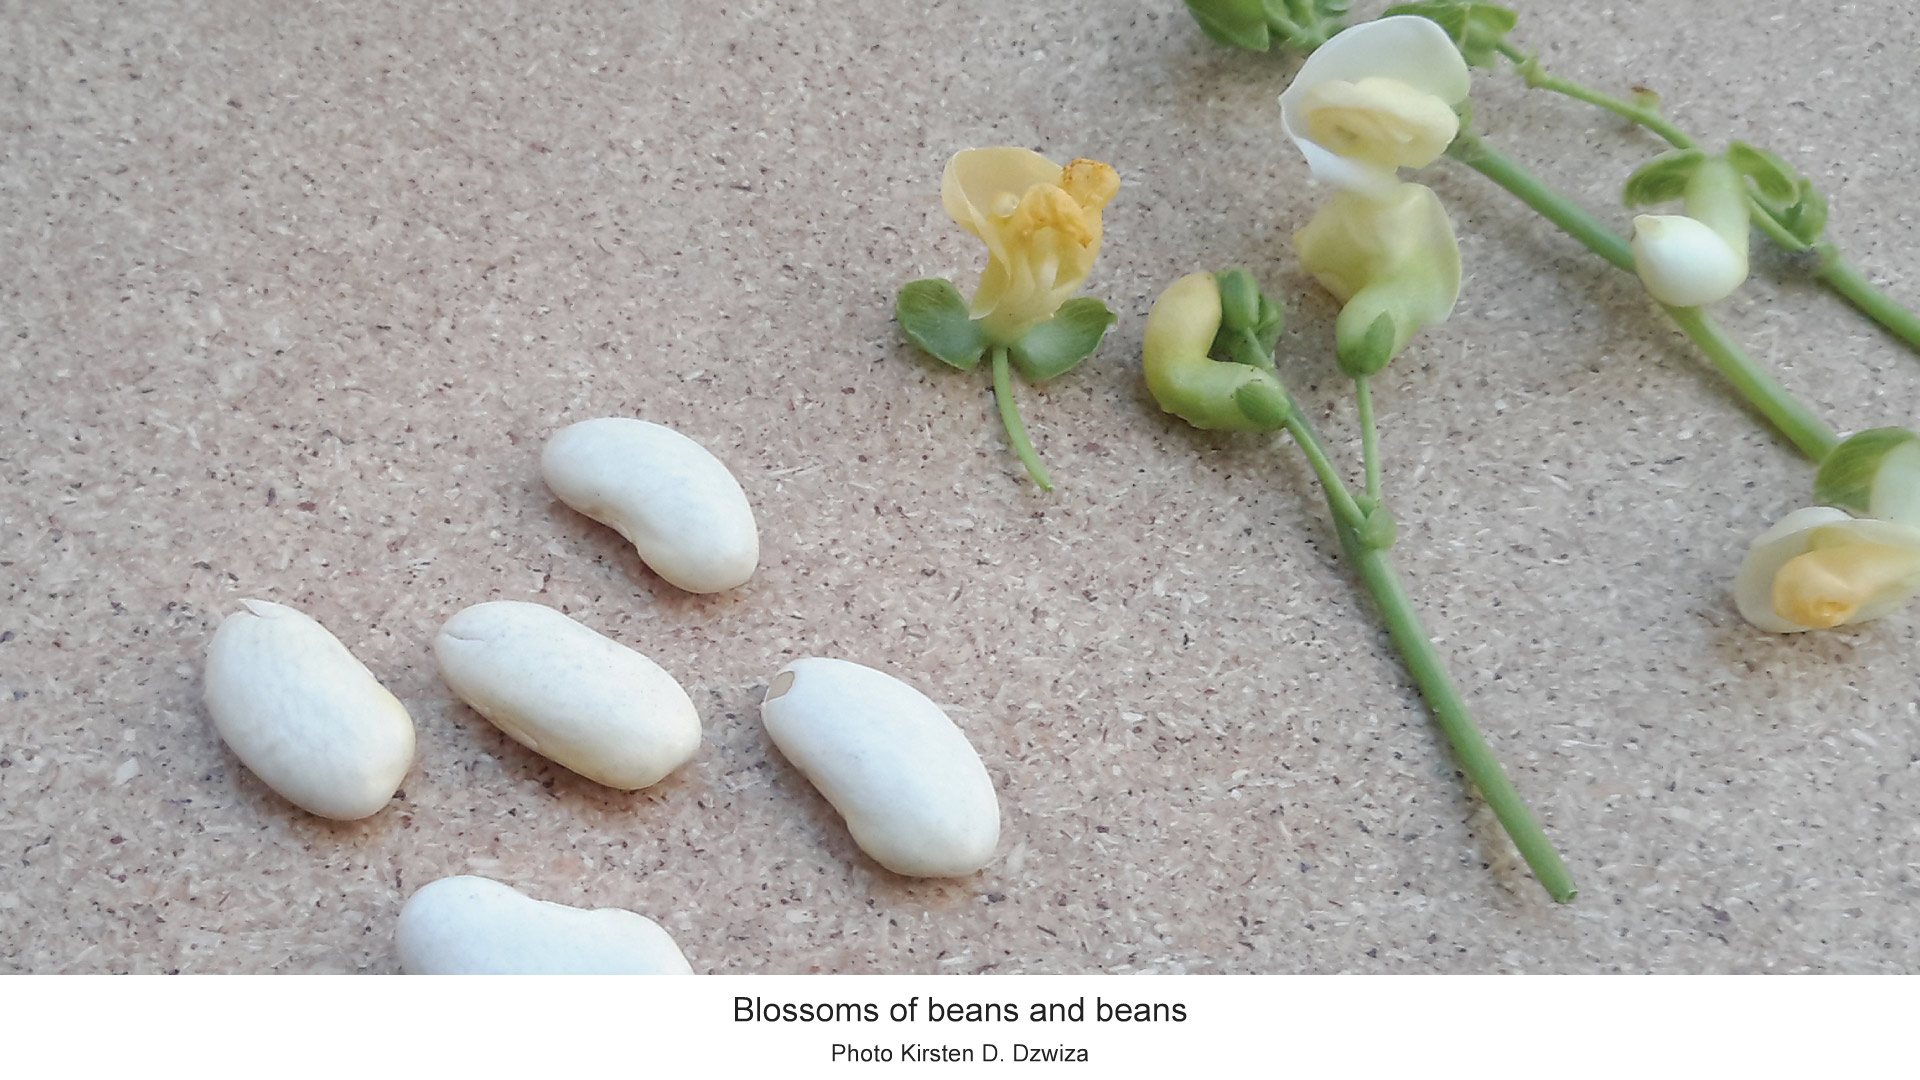 S-PMagLL_experimental-setup-day-1-2022-08-19_bean-blossoms-beans